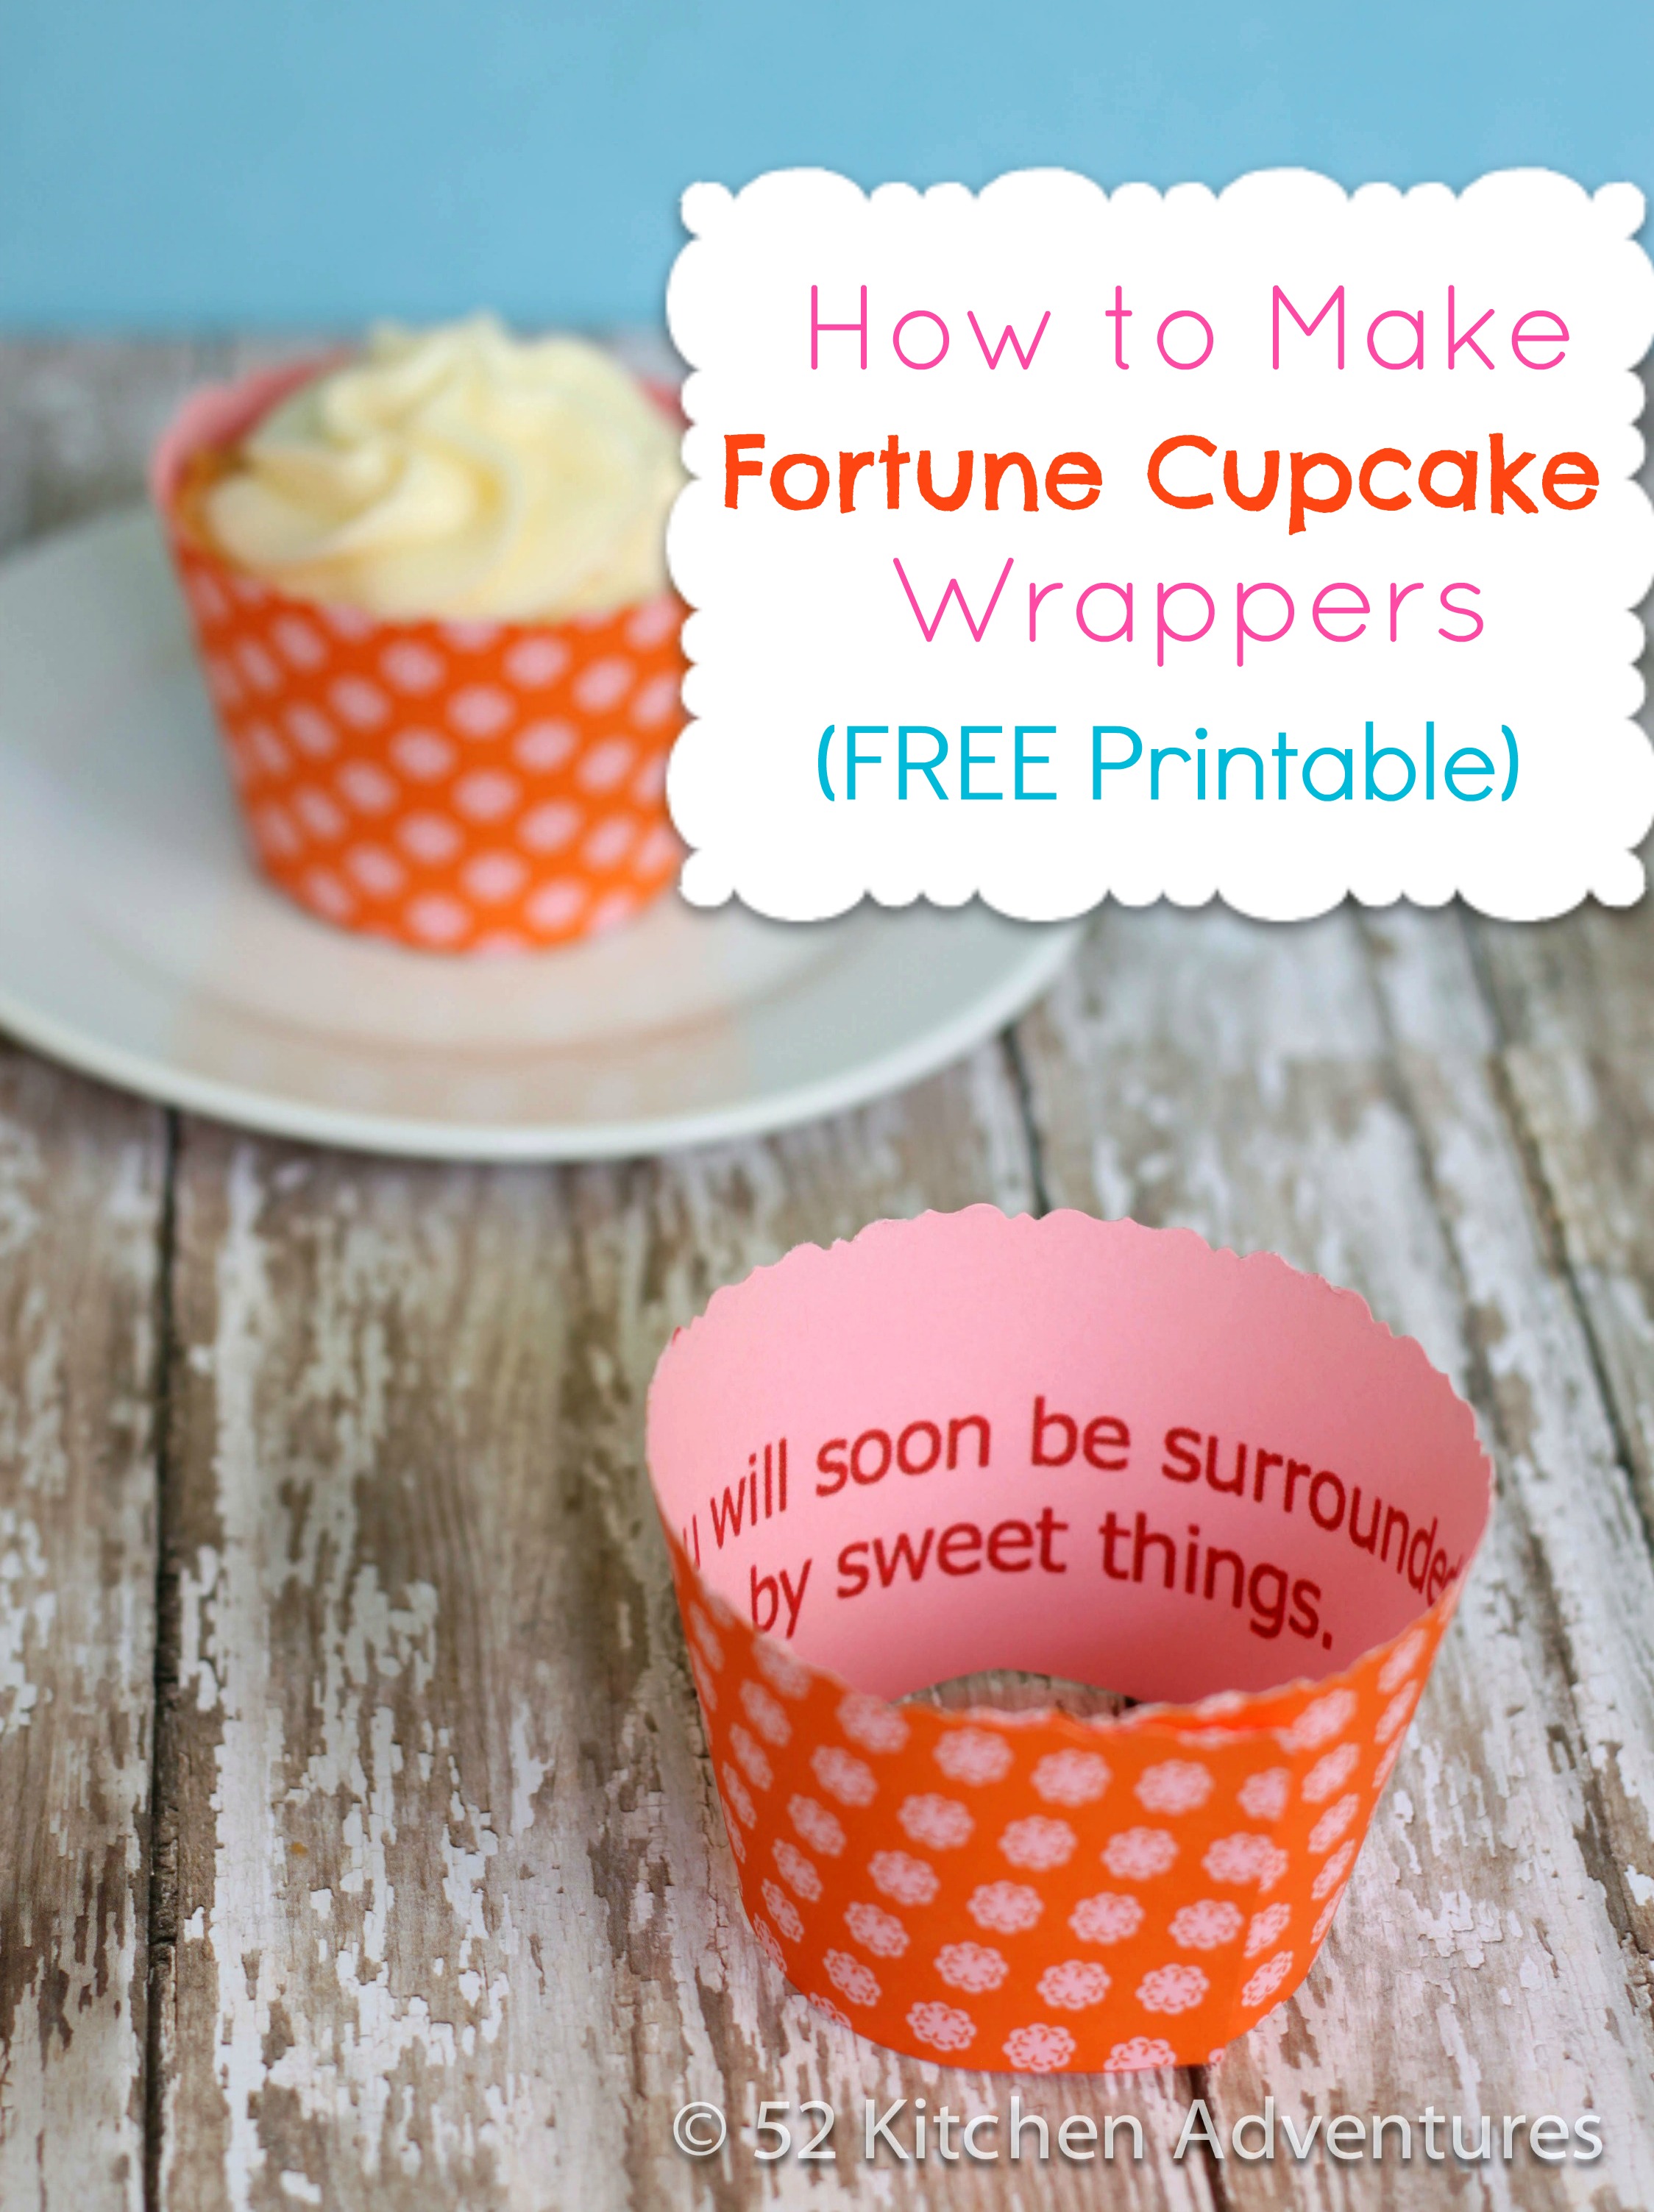 https://www.52kitchenadventures.com/wp-content/uploads/2012/07/How-to-Make-Fortune-Cupcake-Wrappers1.jpg